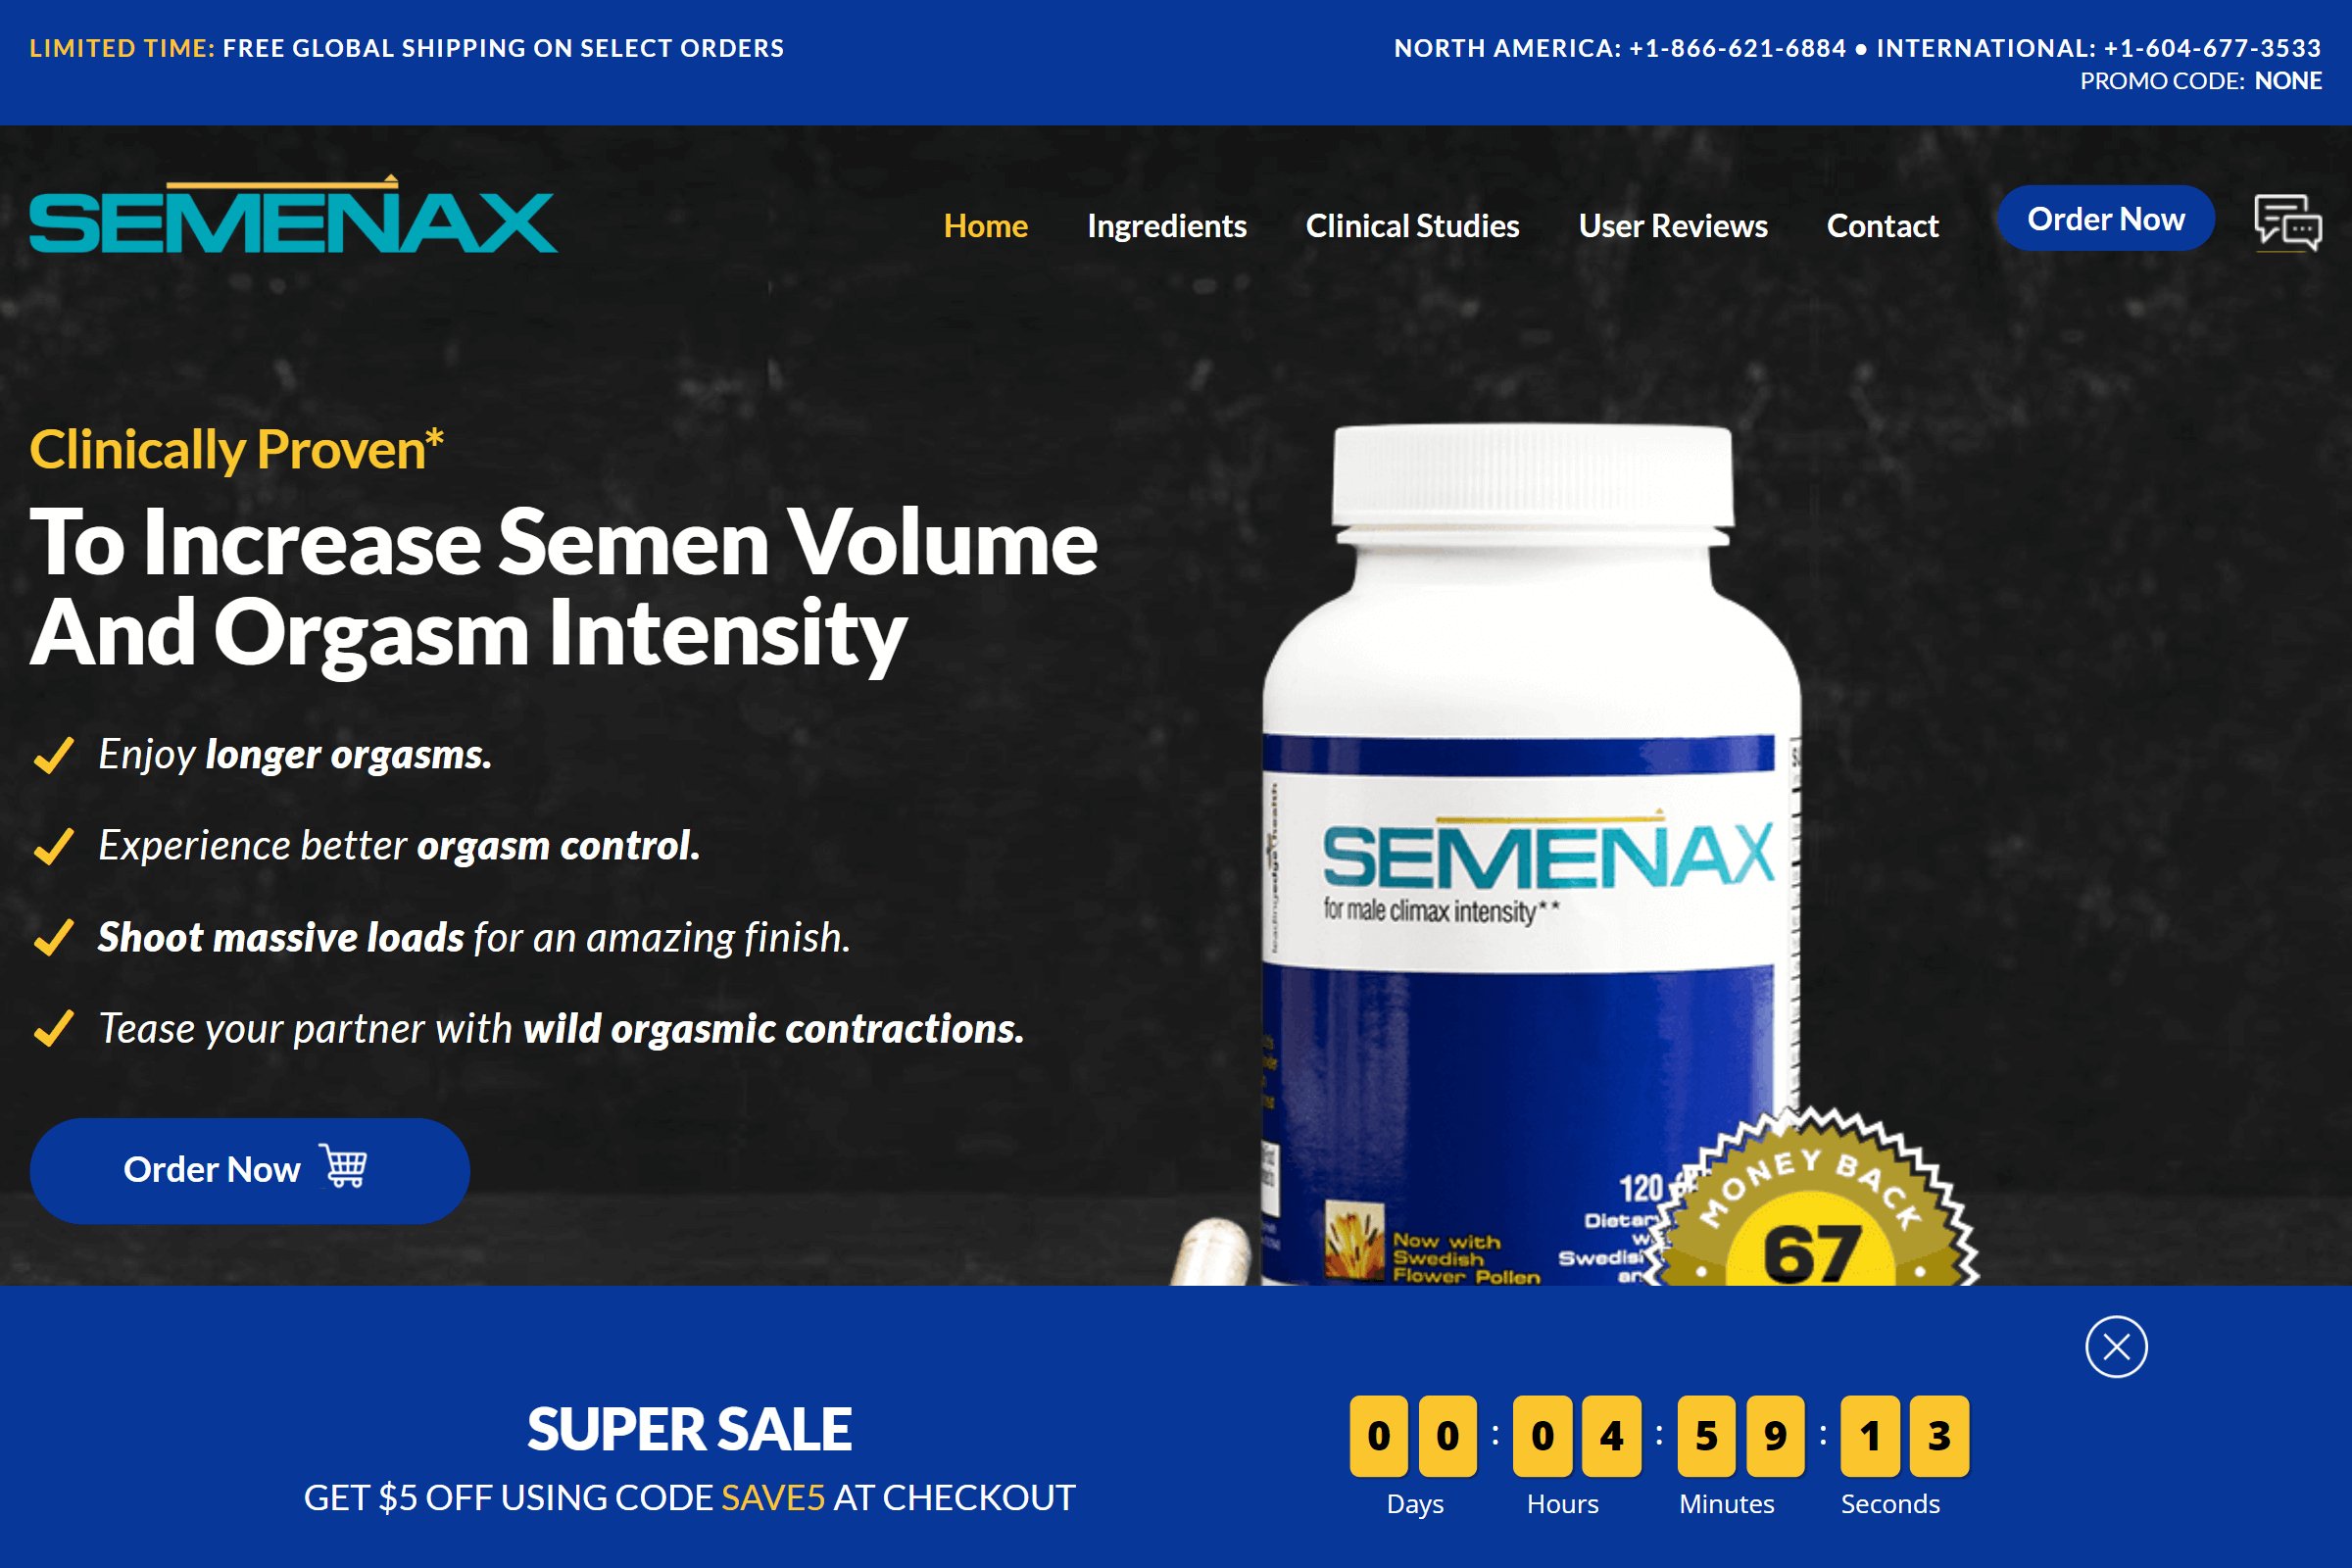 Semenax on ReadSomeReviews